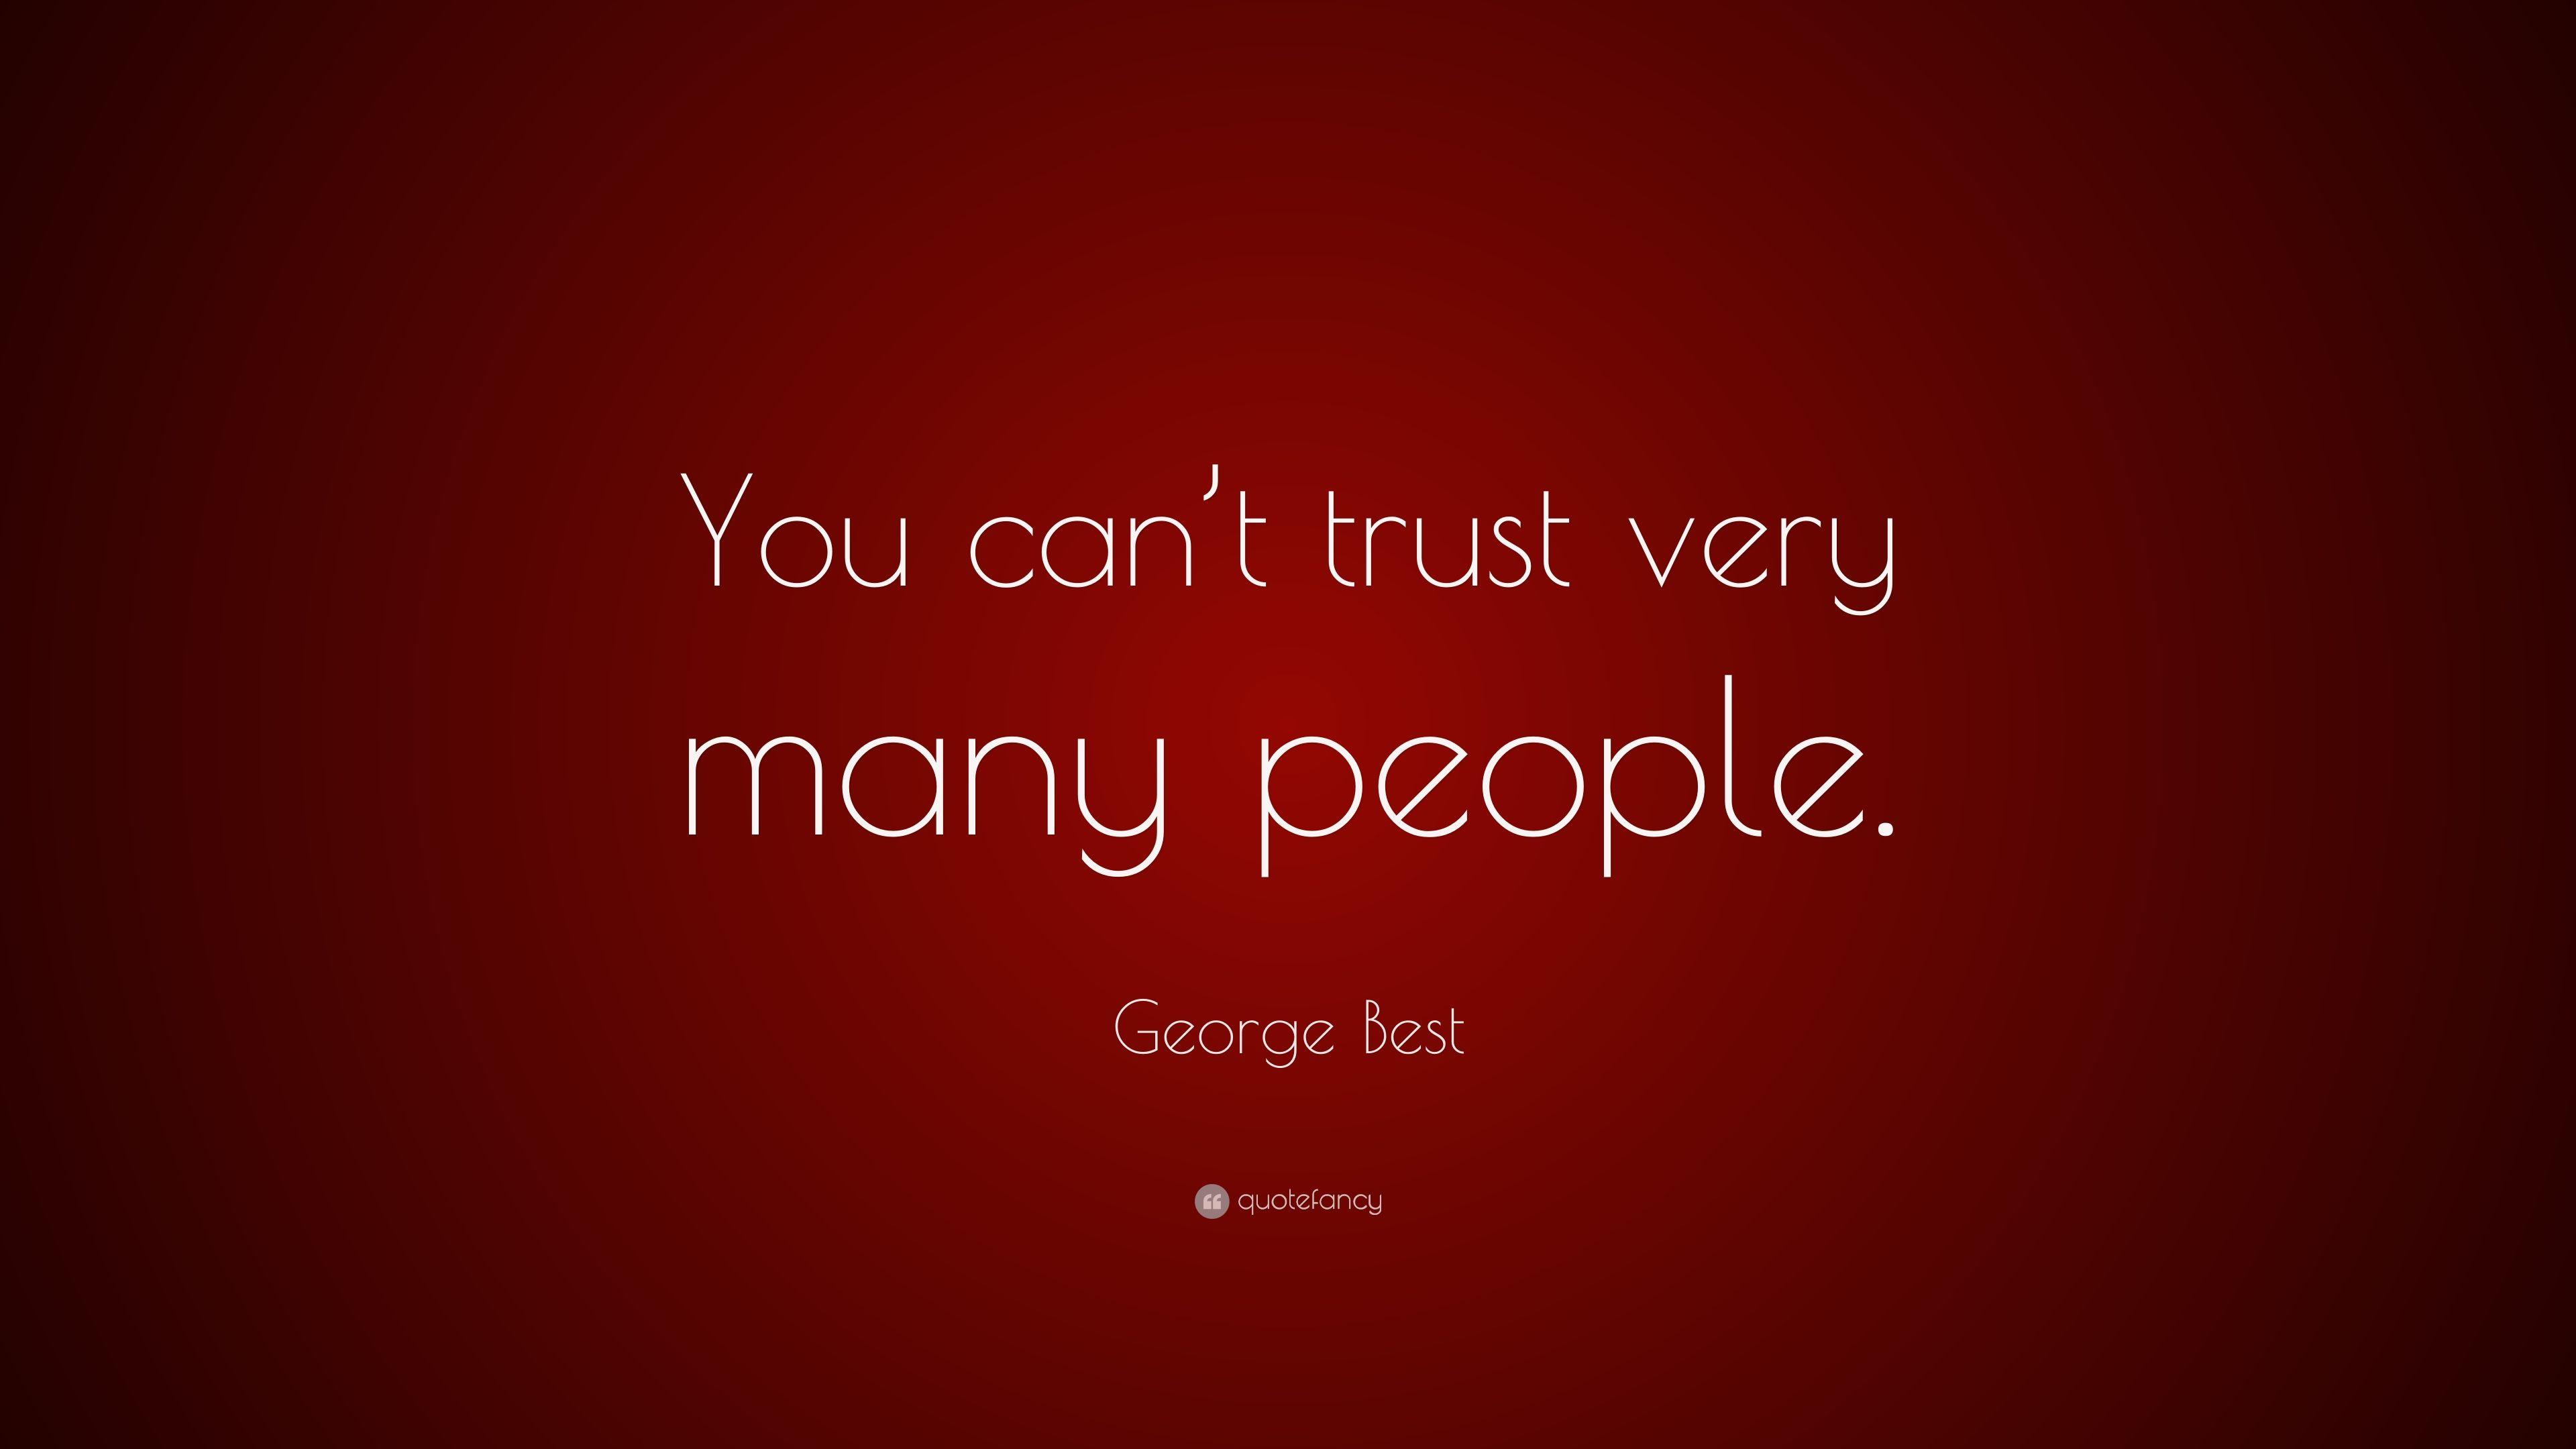 George Best Quote: “You can't trust very many people.” 7